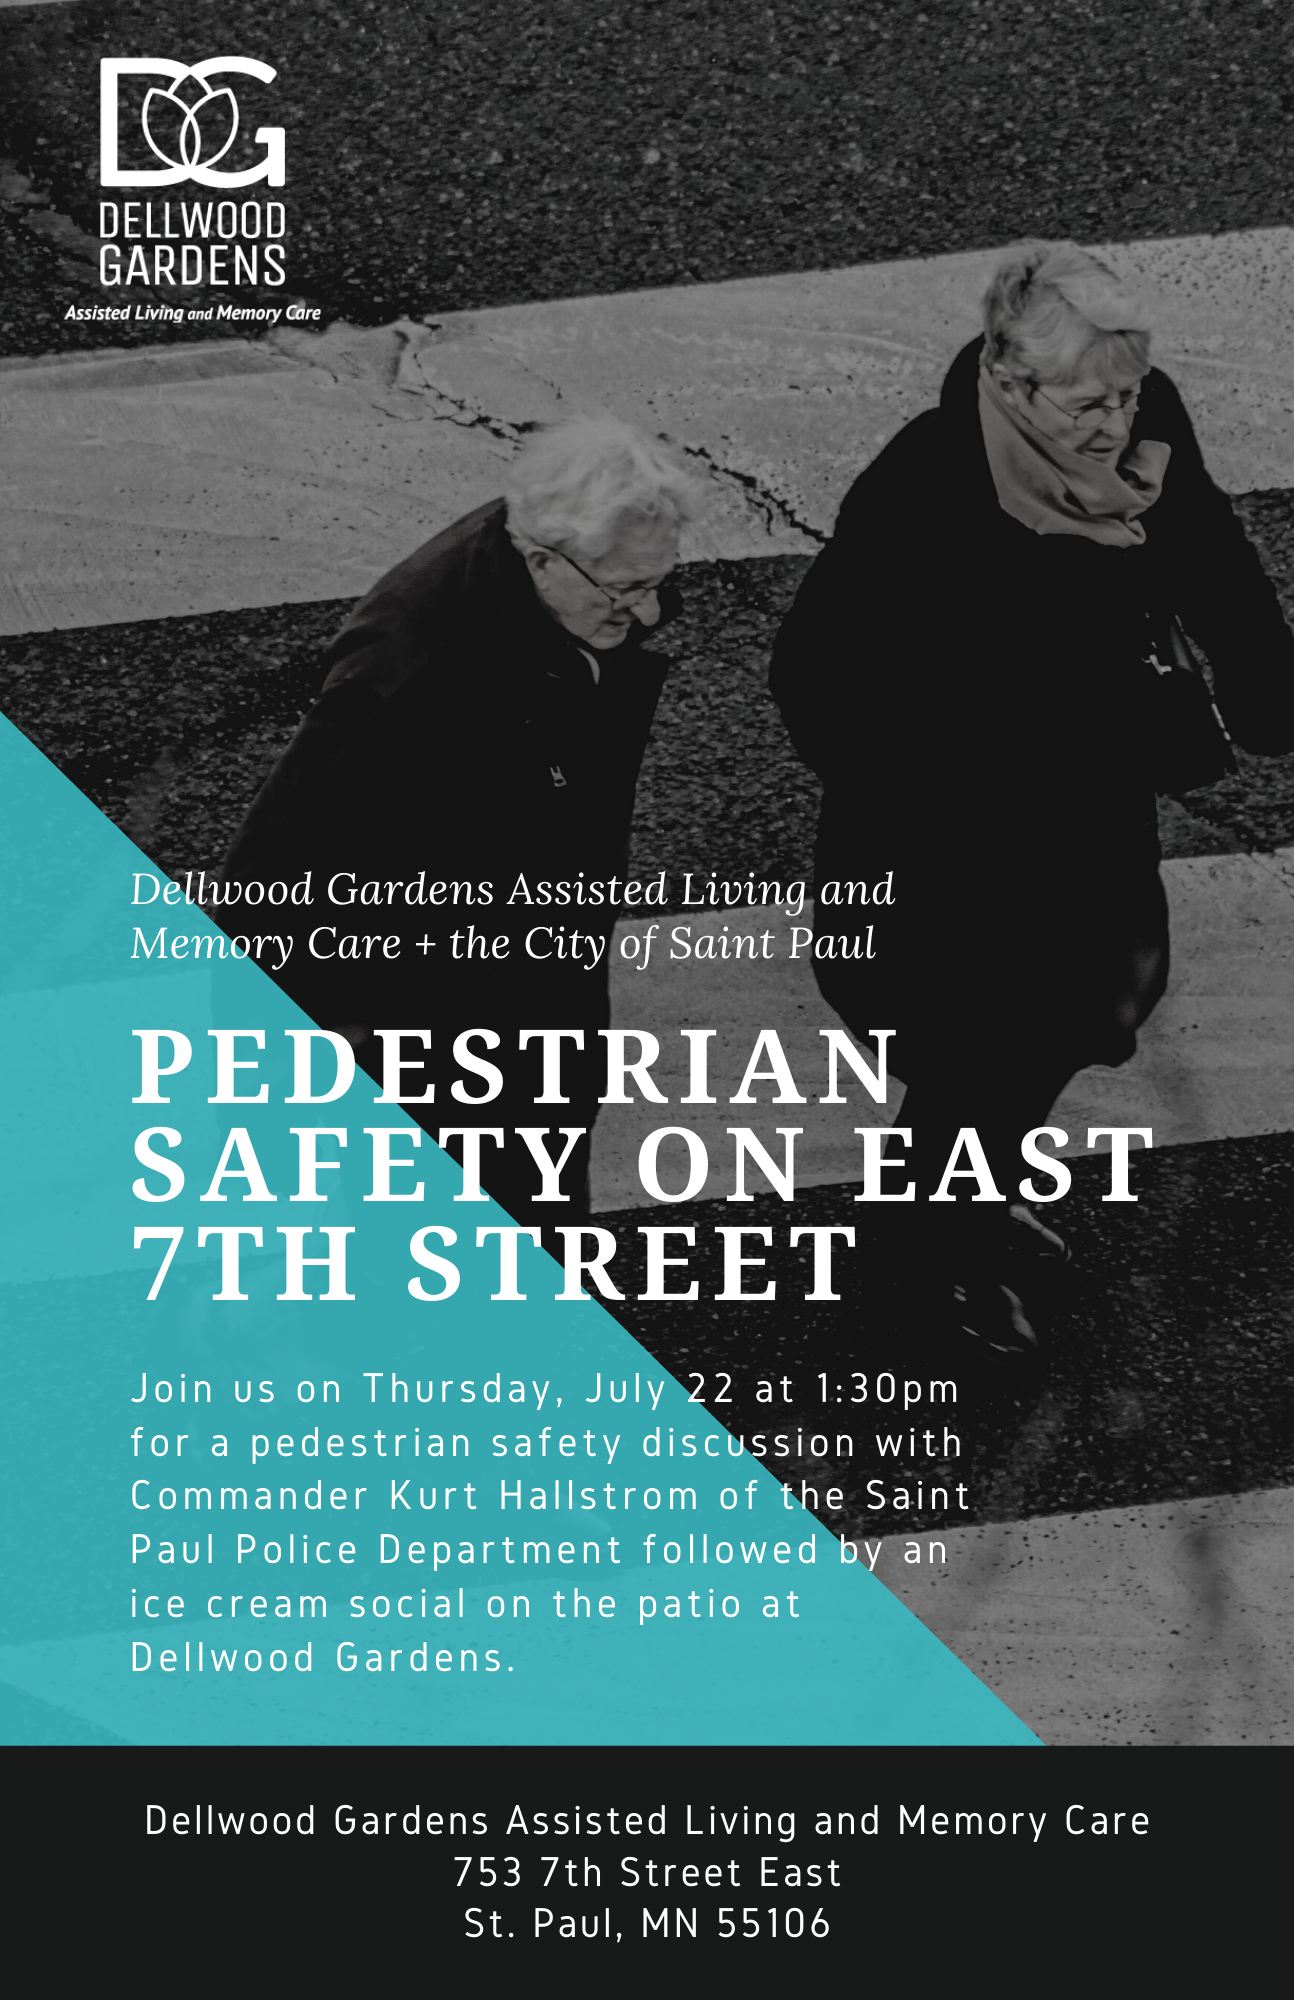 Event Promo Photo For Pedestrian Safety on East 7th Street